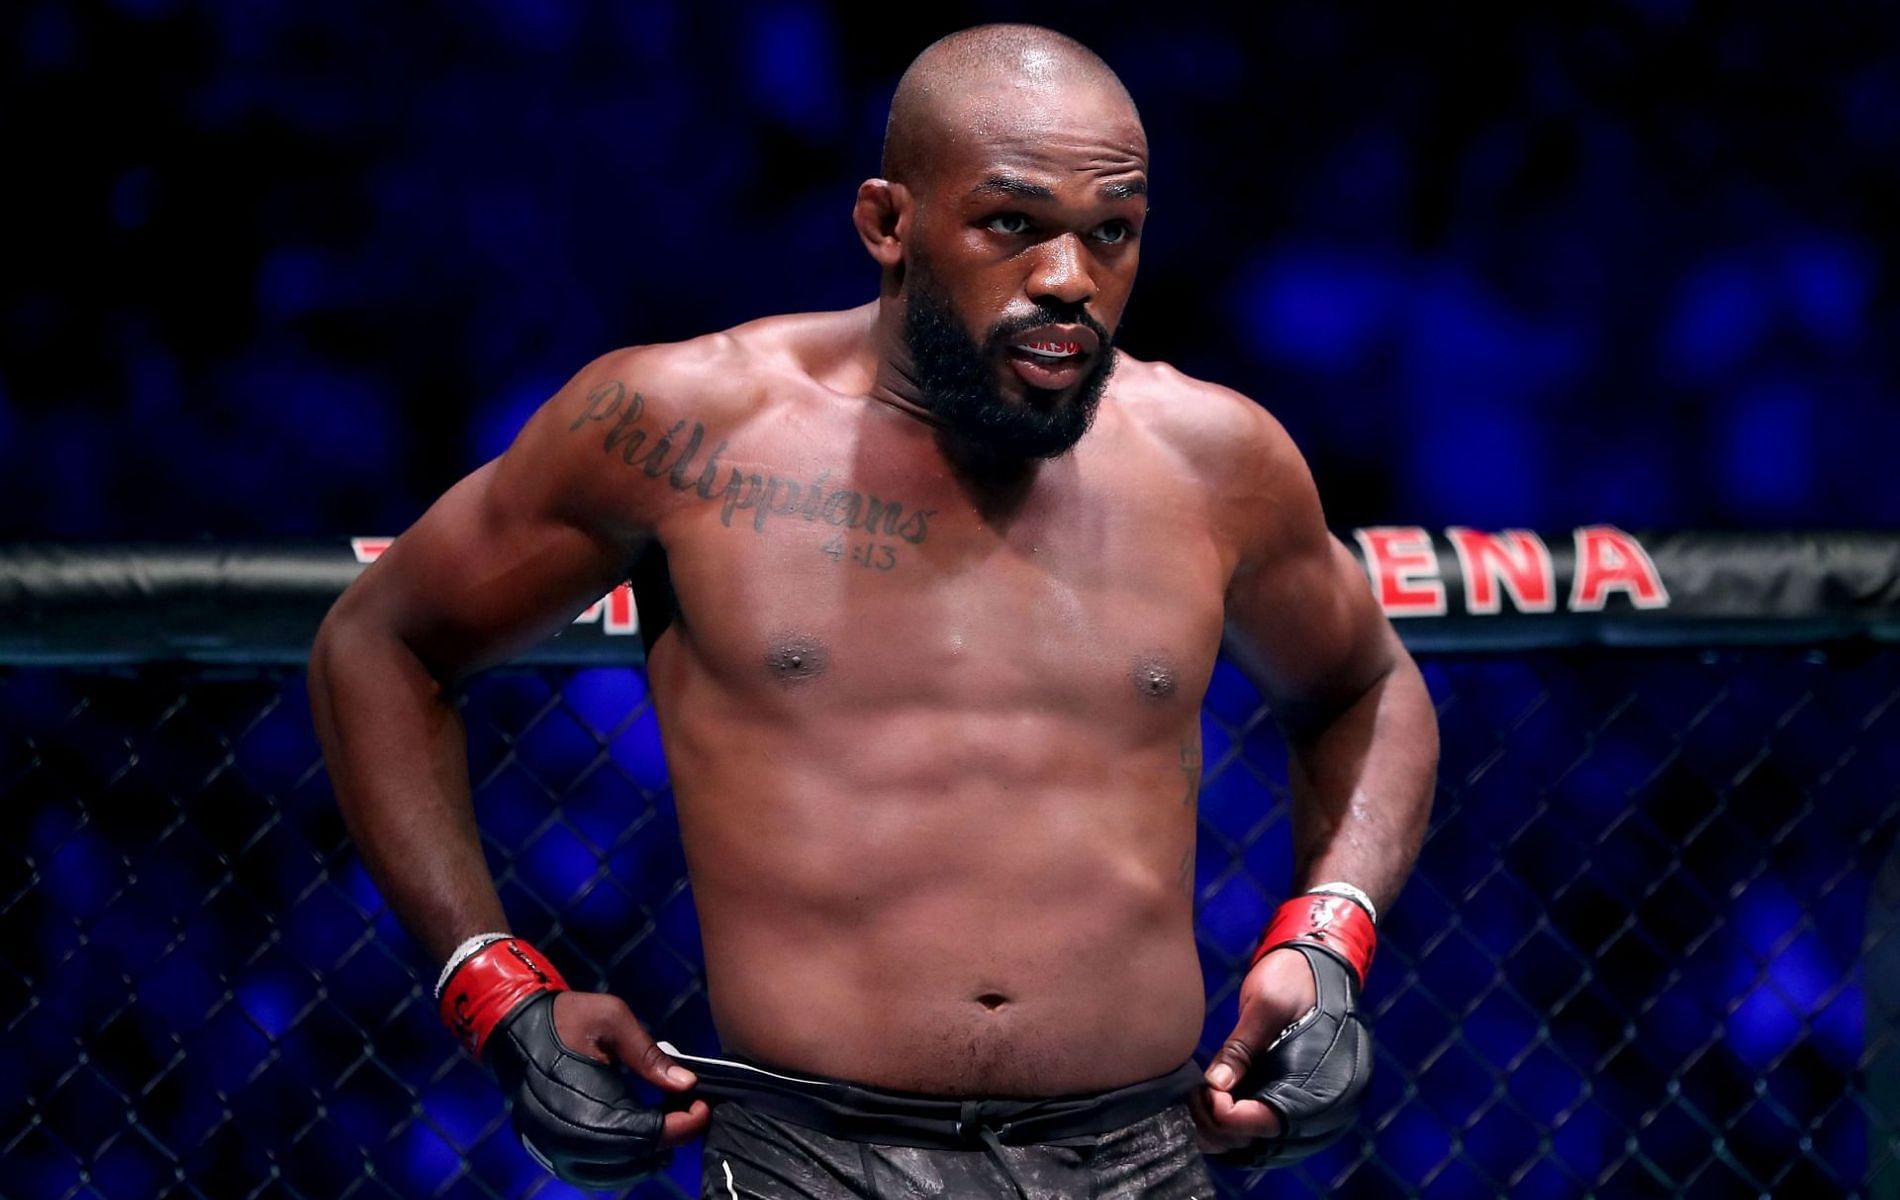 Jon Jones is targeting to return to the UFC in the next few months